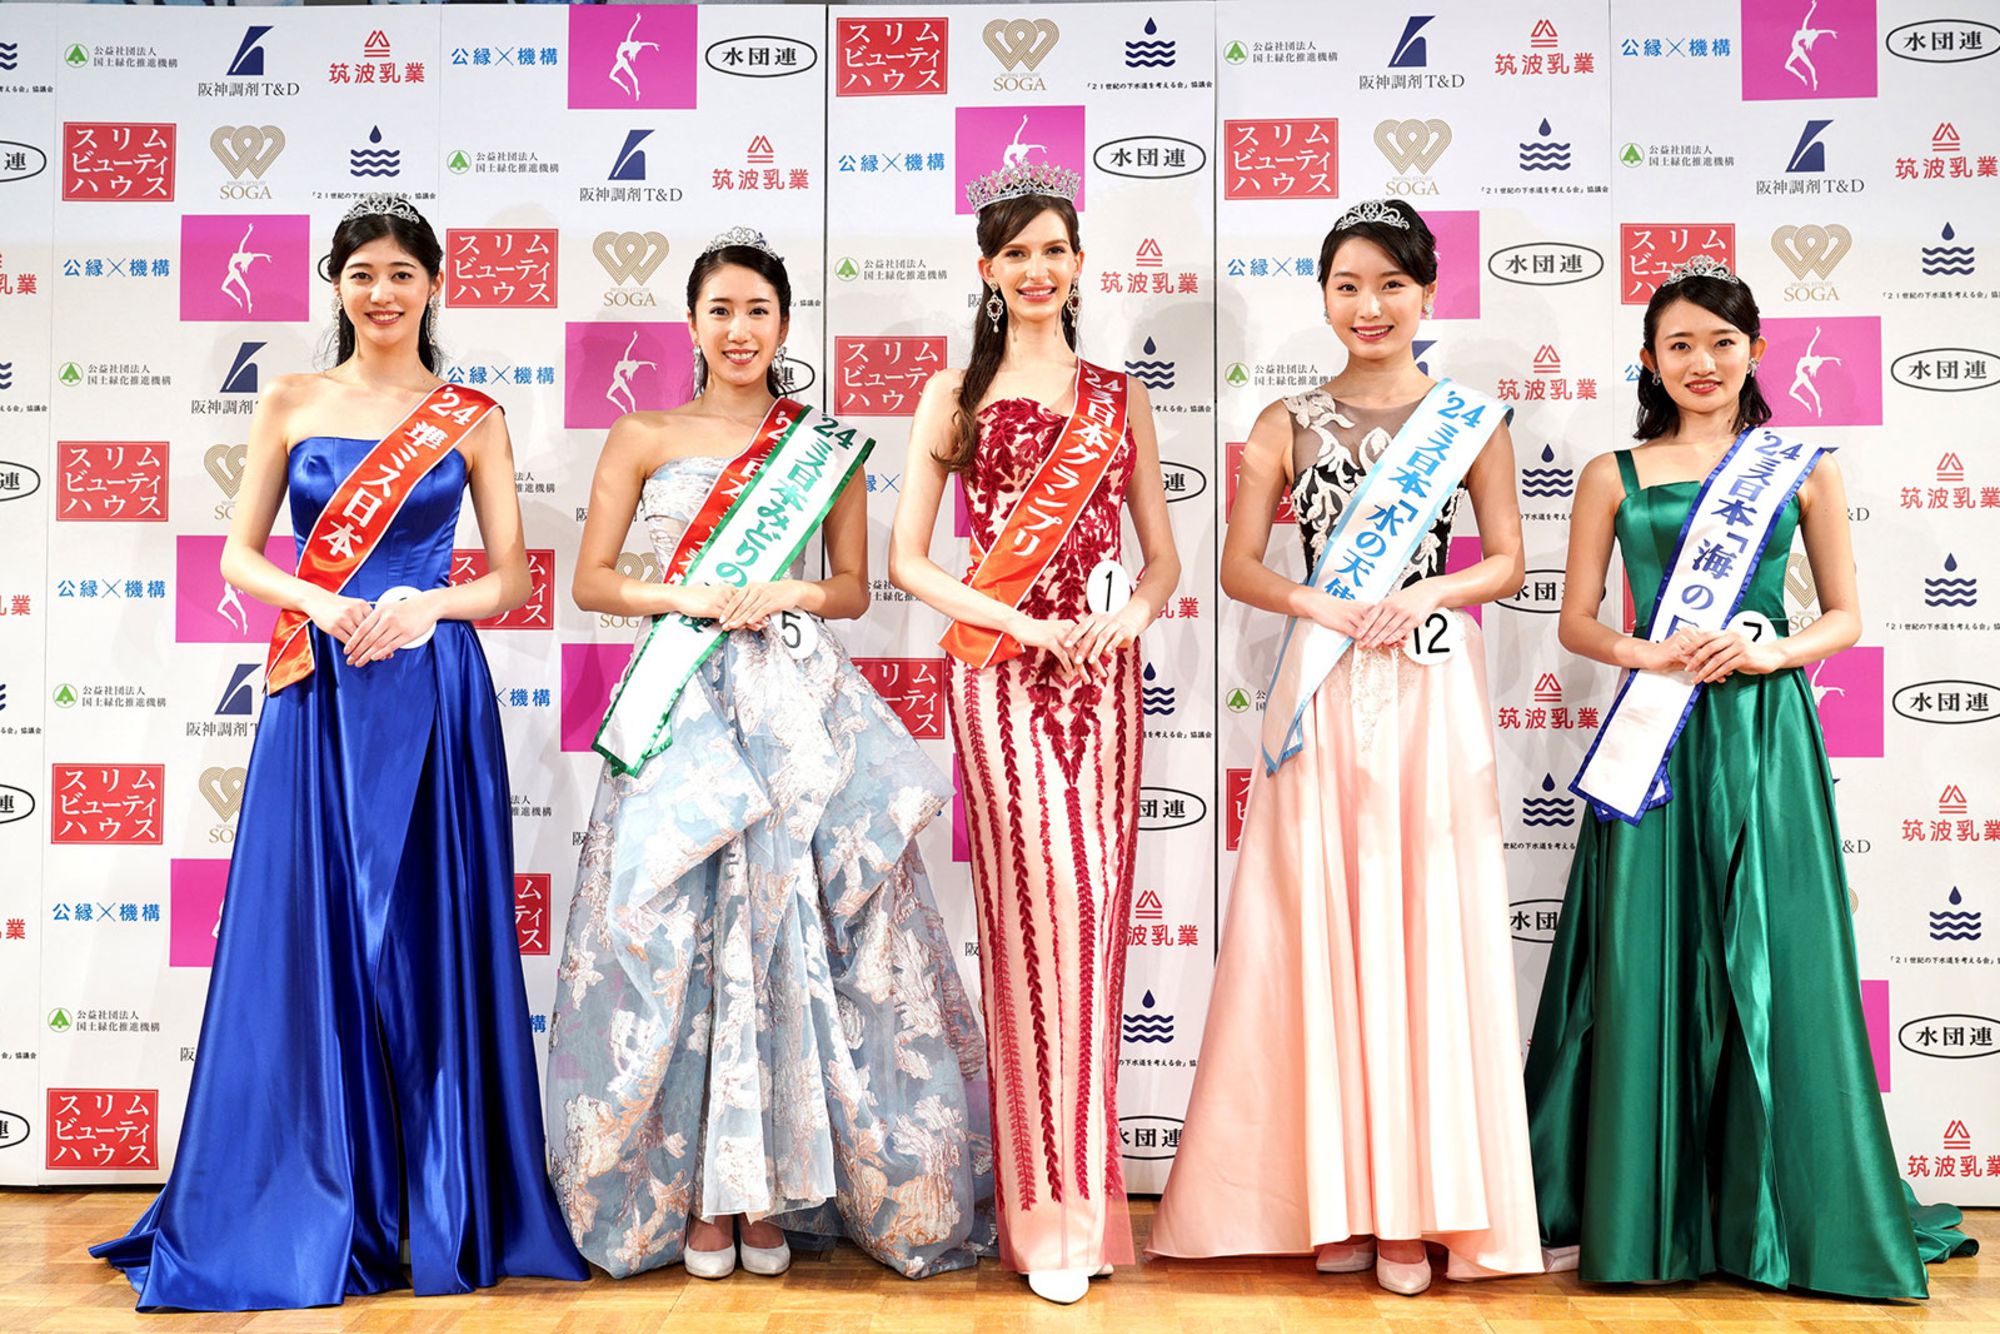 Karolina Shiino (center), the winner of the Miss Japan 2024, poses with other prize winners at the contest in Tokyo on January 22, 2024. She has since relinquished her title.